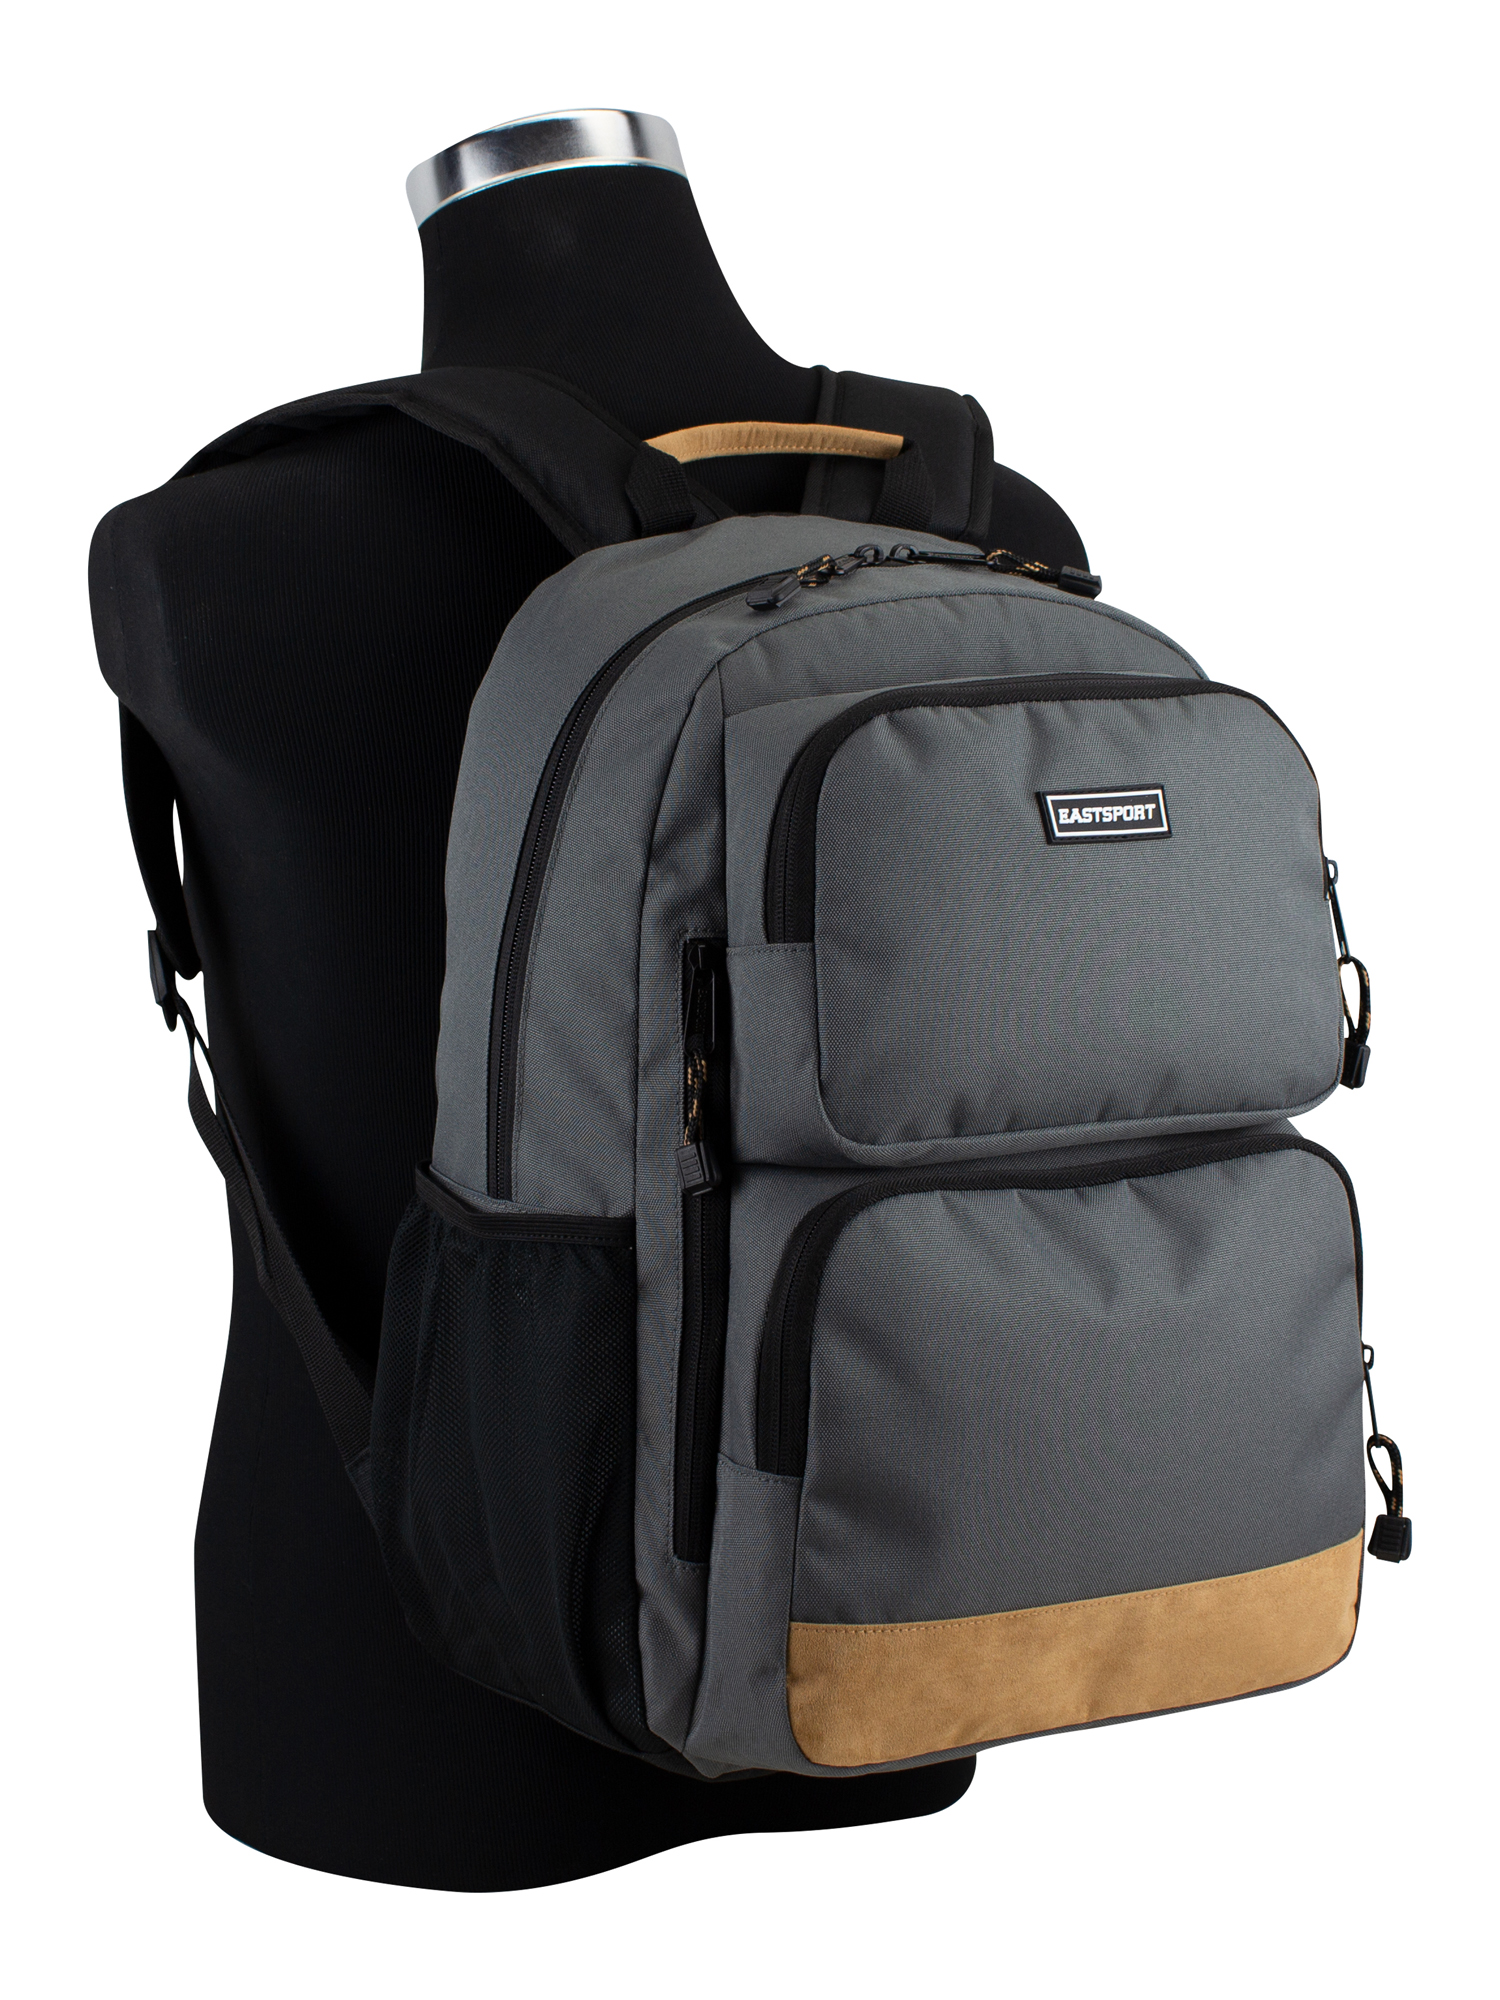 Eastsport Unisex Core Excel Backpack, Charcoal - image 3 of 7